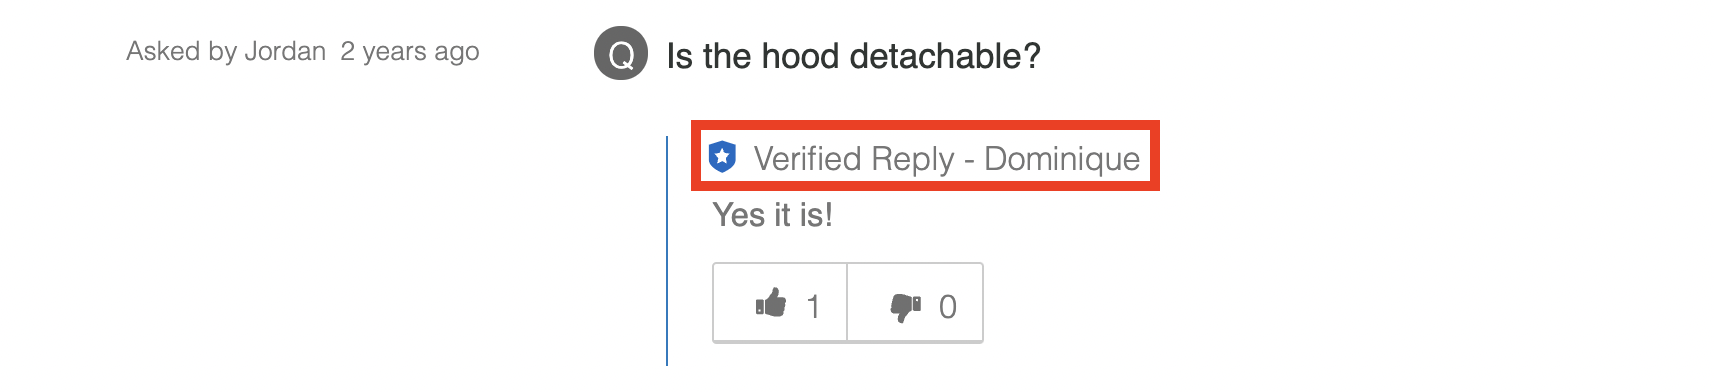 Verified_Reply_Q_A_Badge.png